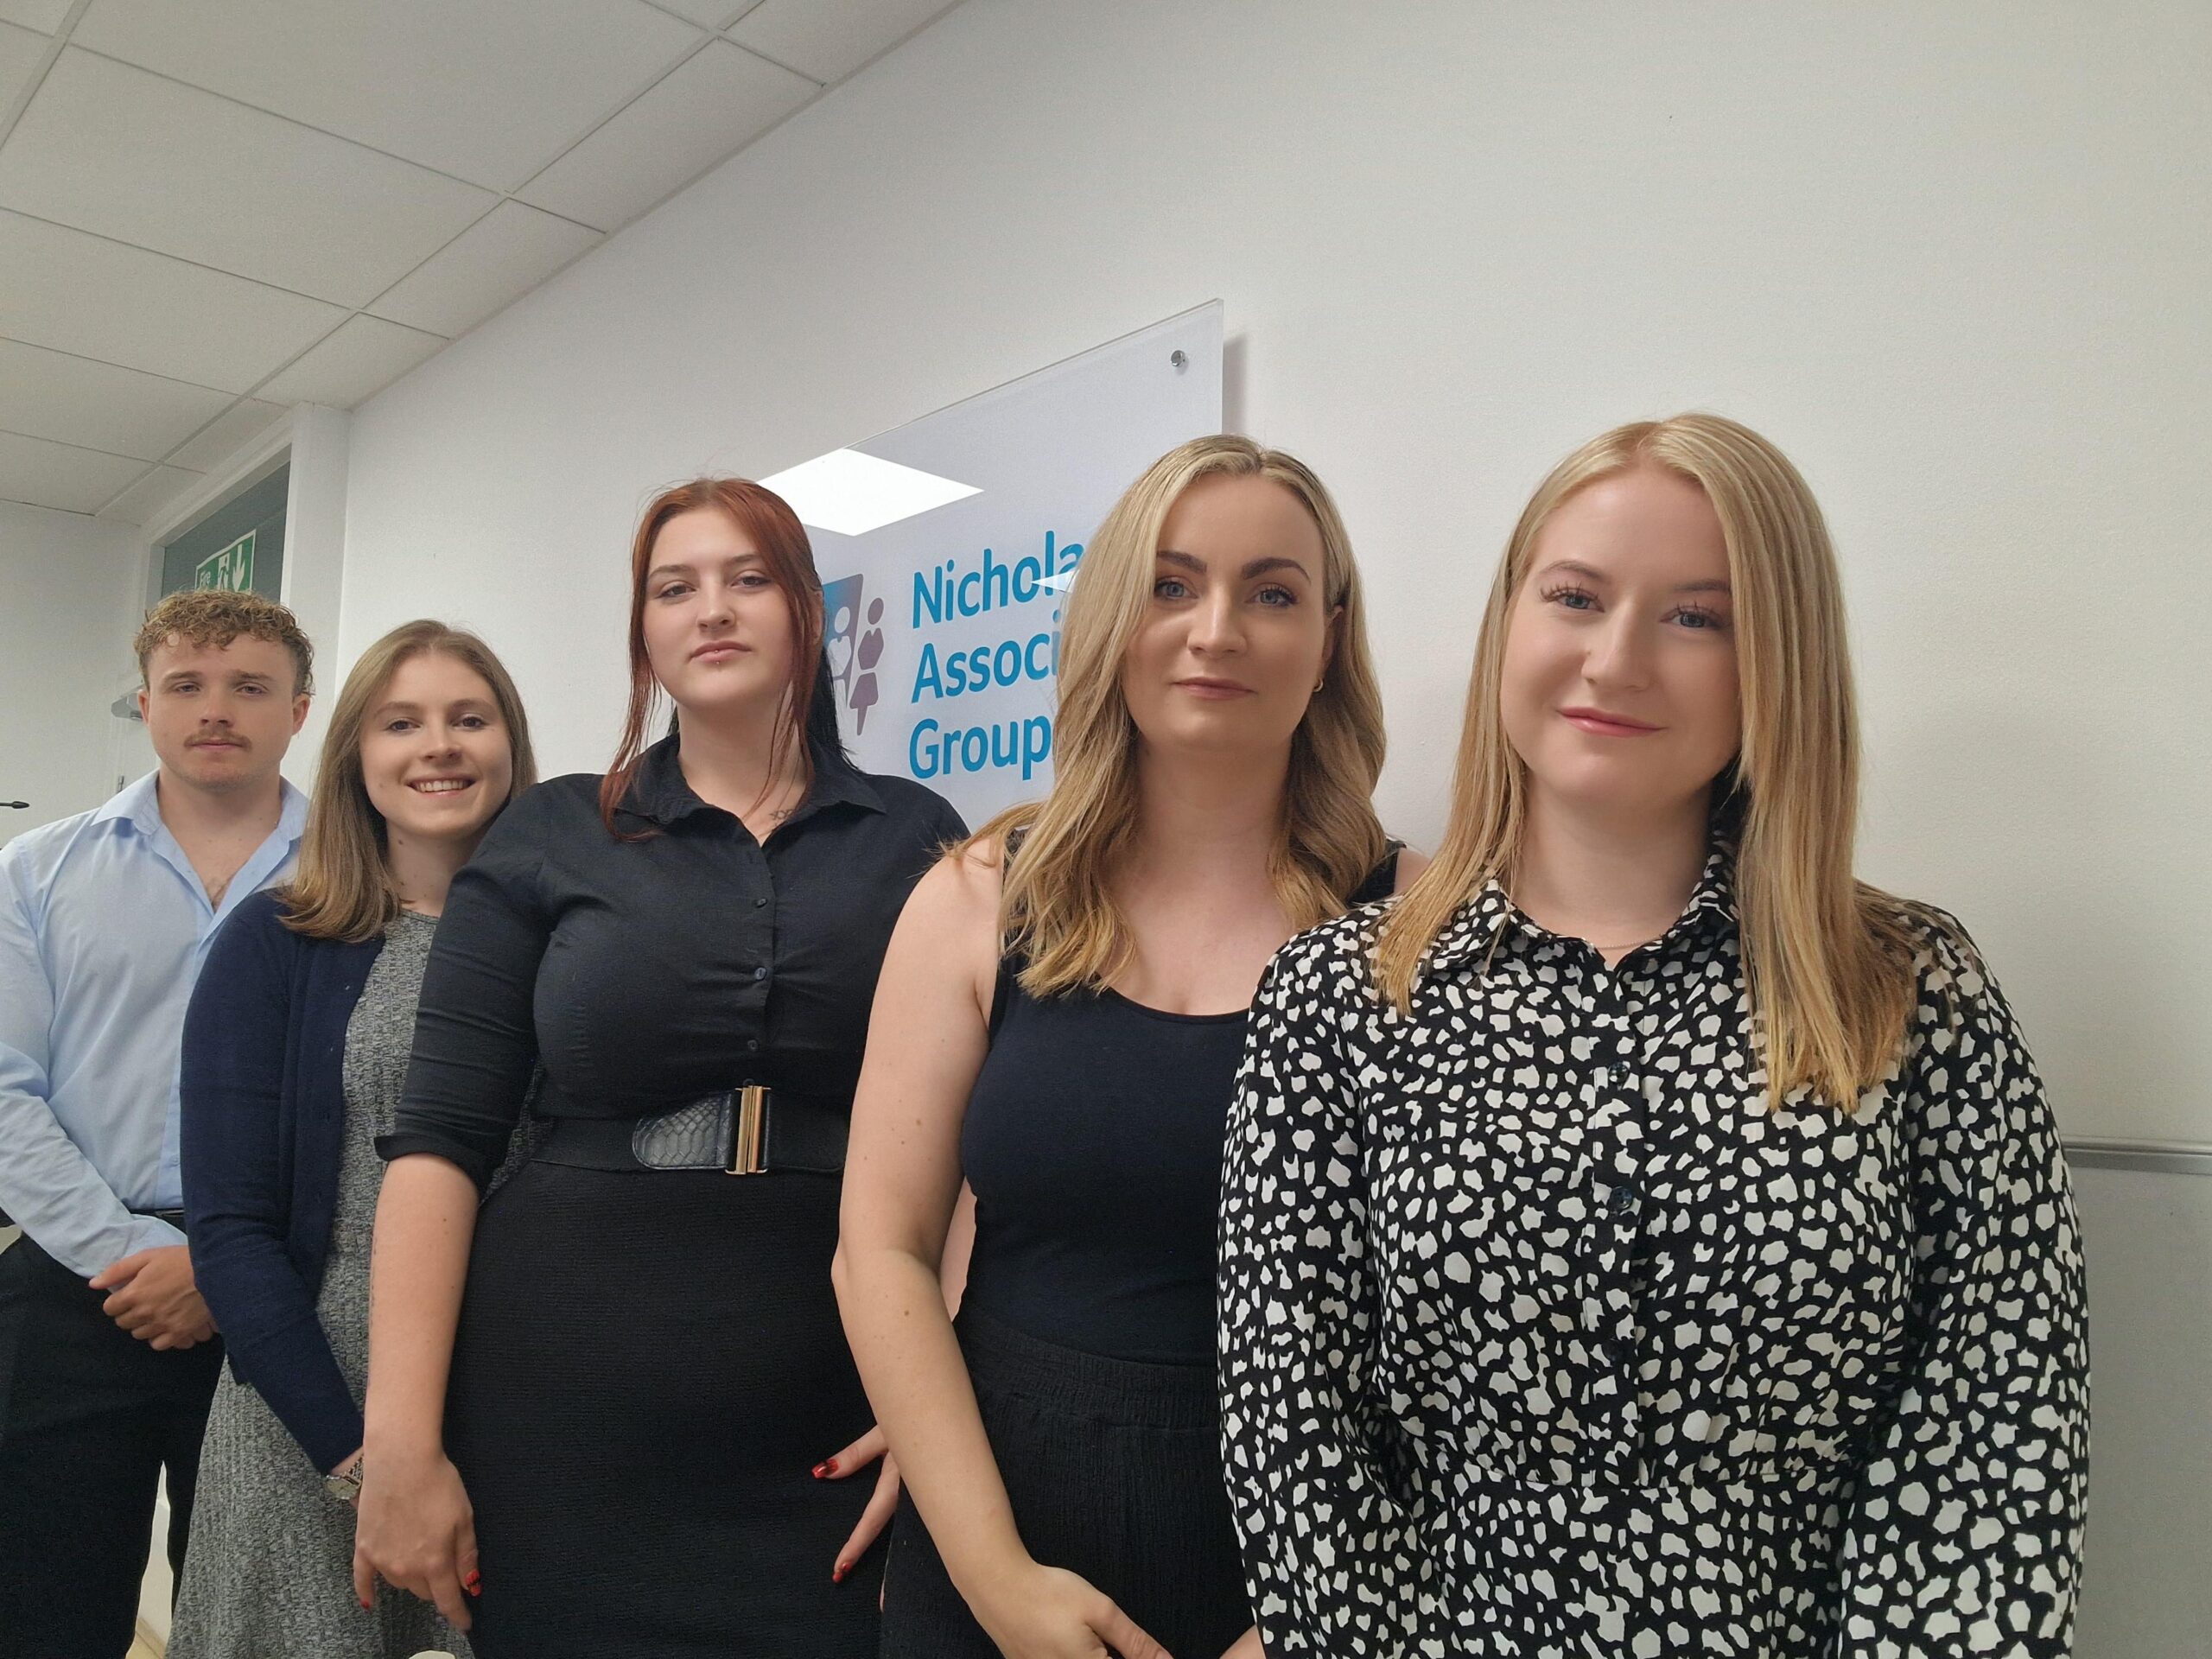 Meet our South Yorkshire Team!